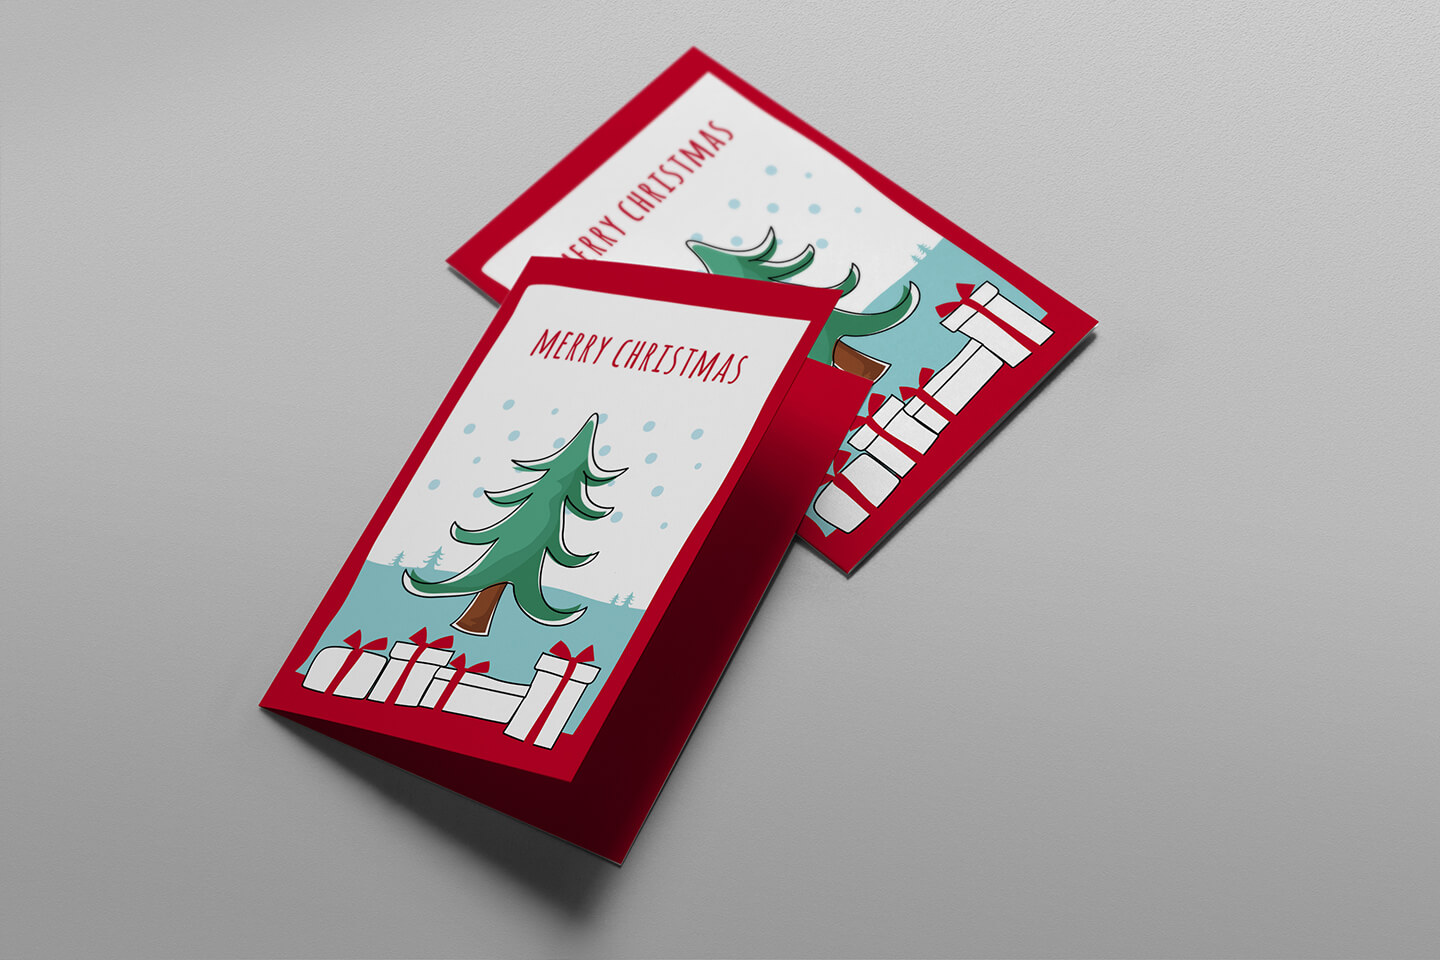 Free Templates | Christmas Card | Free Commercial Use Inside Free Christmas Card Templates For Photoshop